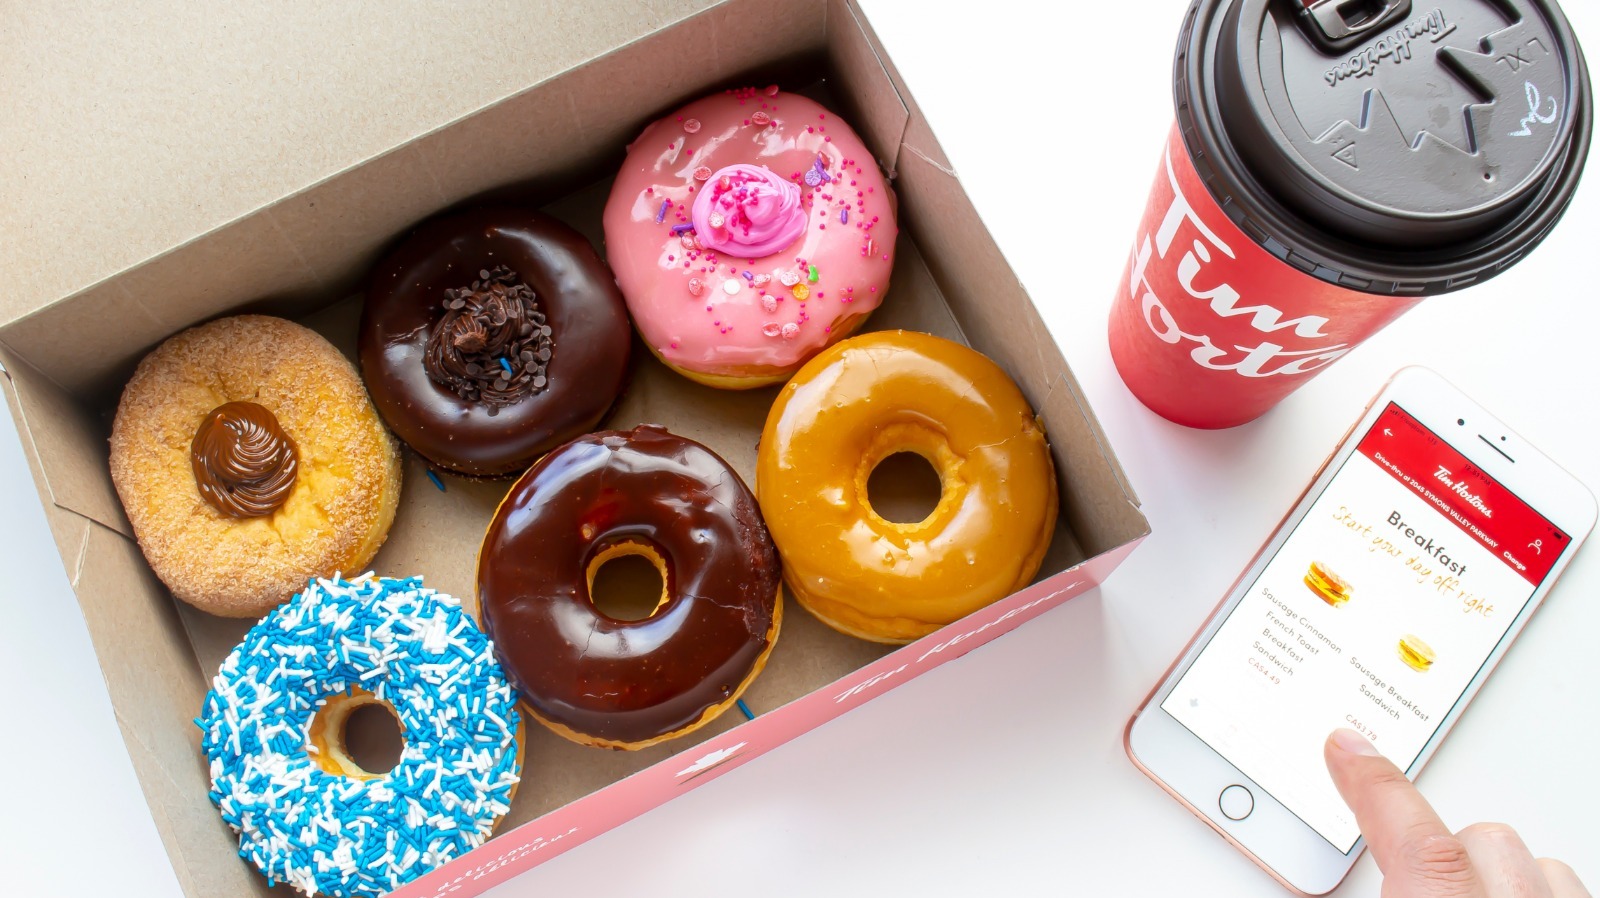 Tim Hortons Donuts, Ranked Worst To Best